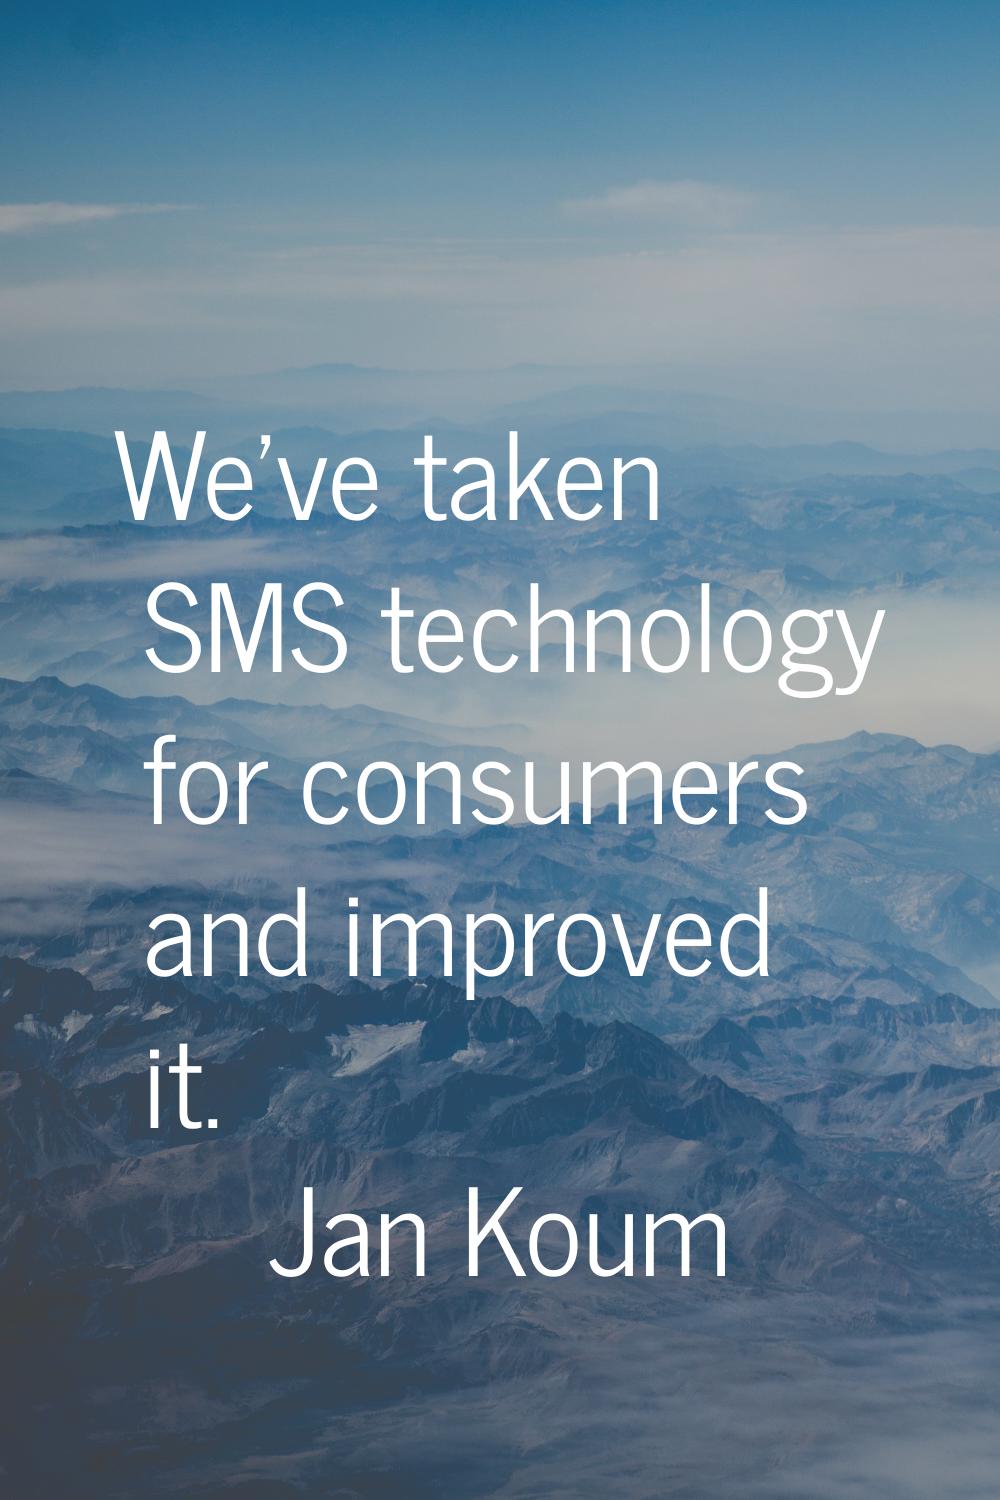 We've taken SMS technology for consumers and improved it.